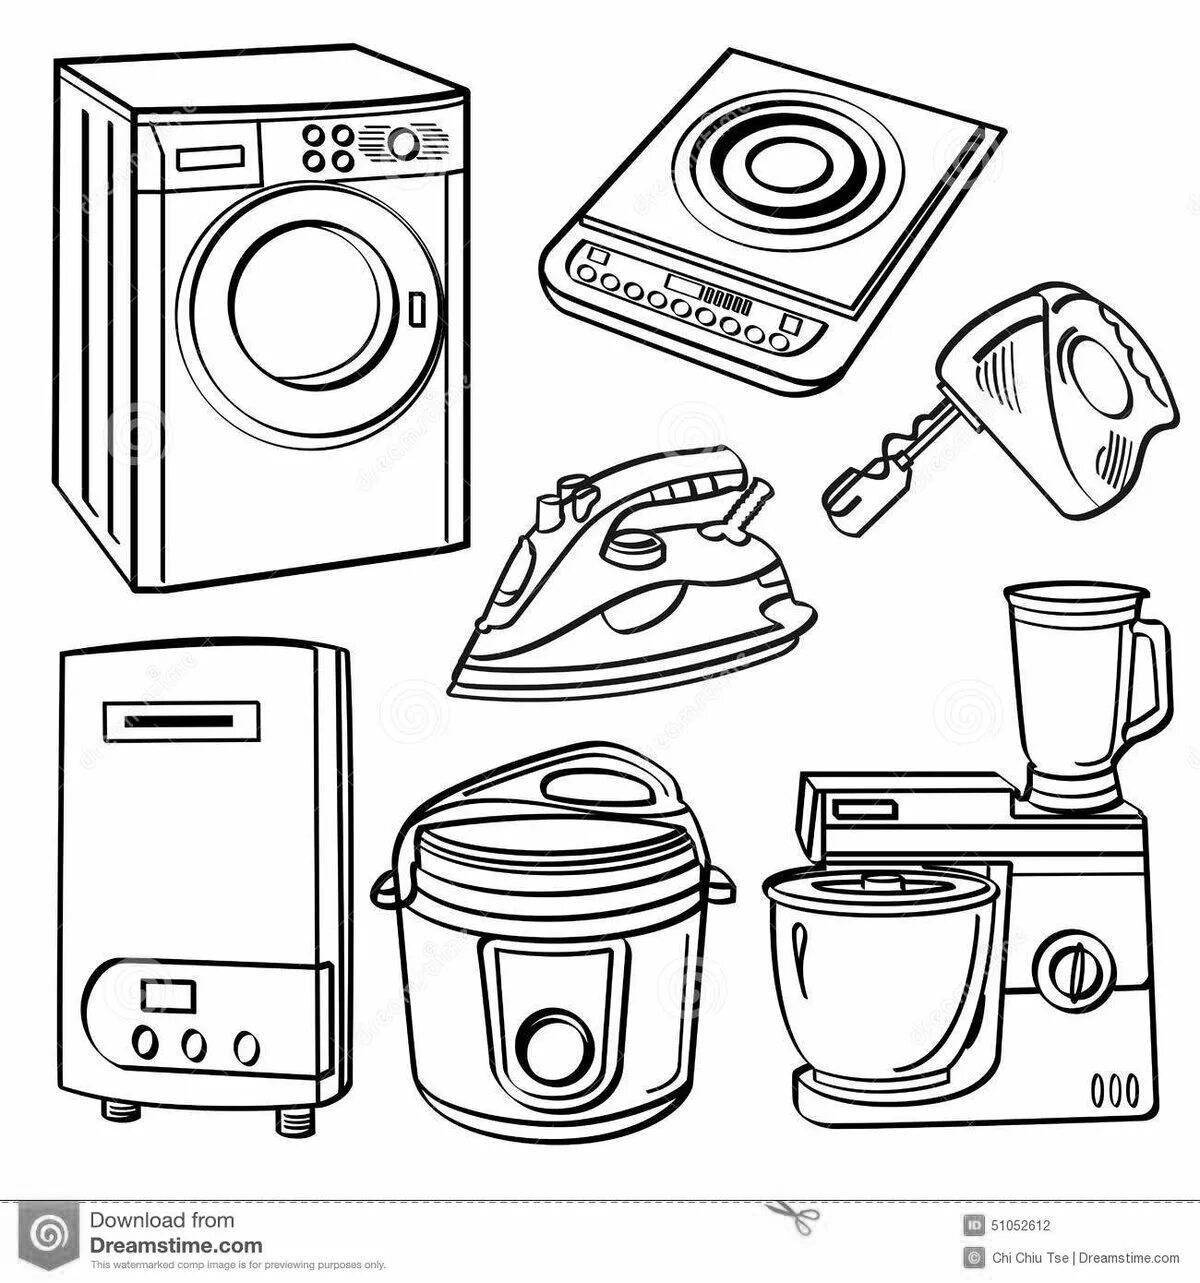 Color-explosion coloring household appliances for children 4-5 years old